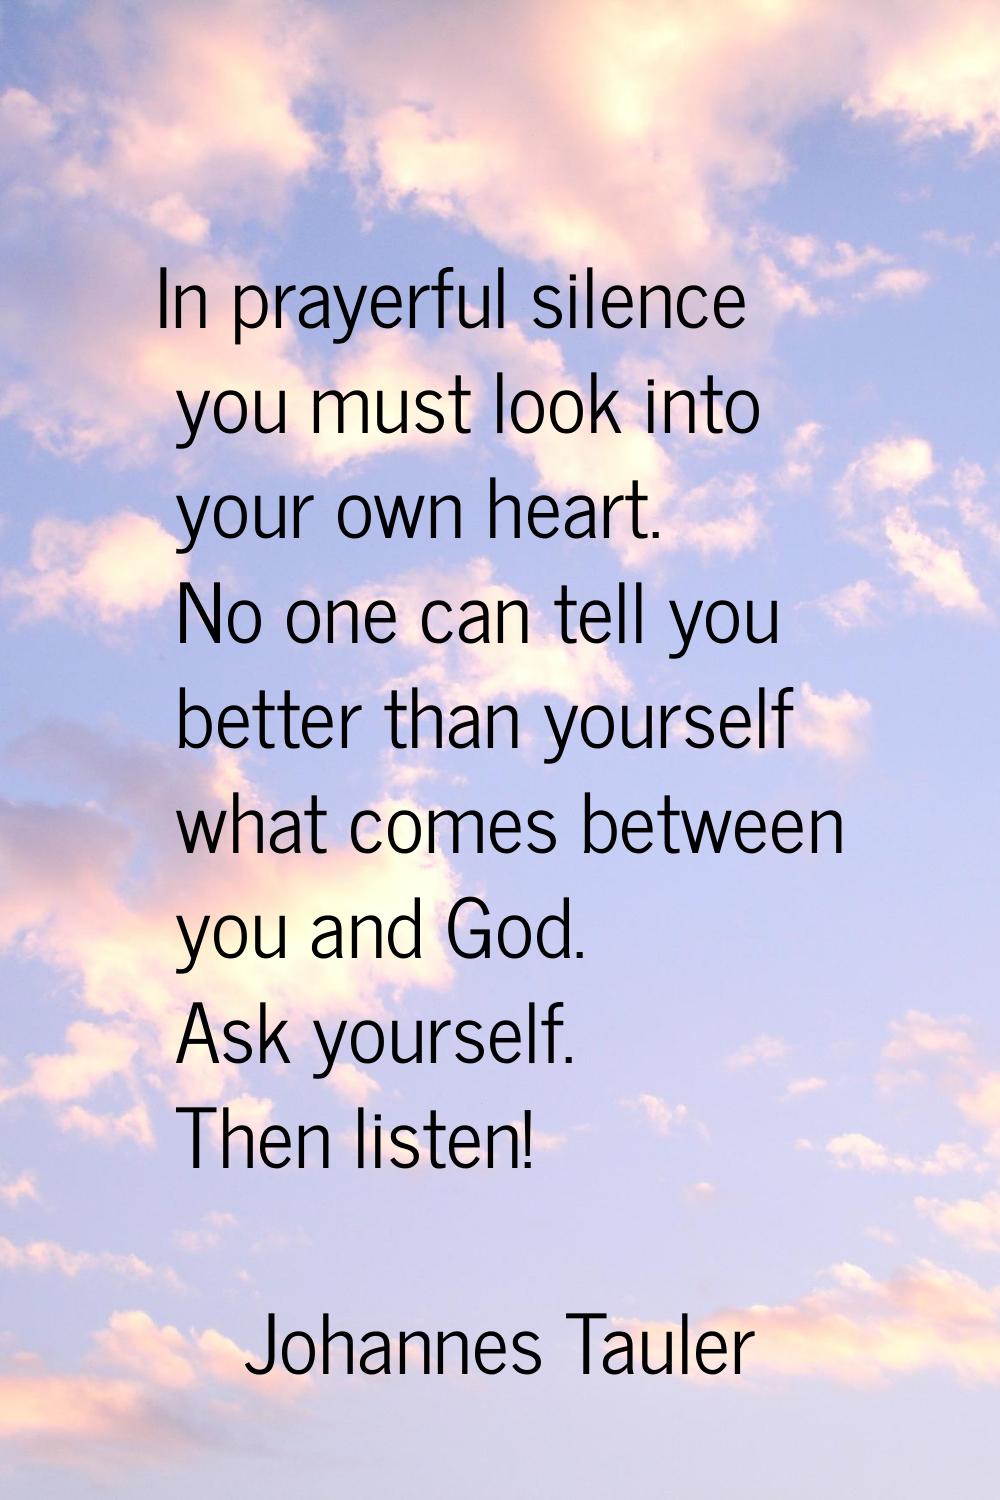 In prayerful silence you must look into your own heart. No one can tell you better than yourself wh